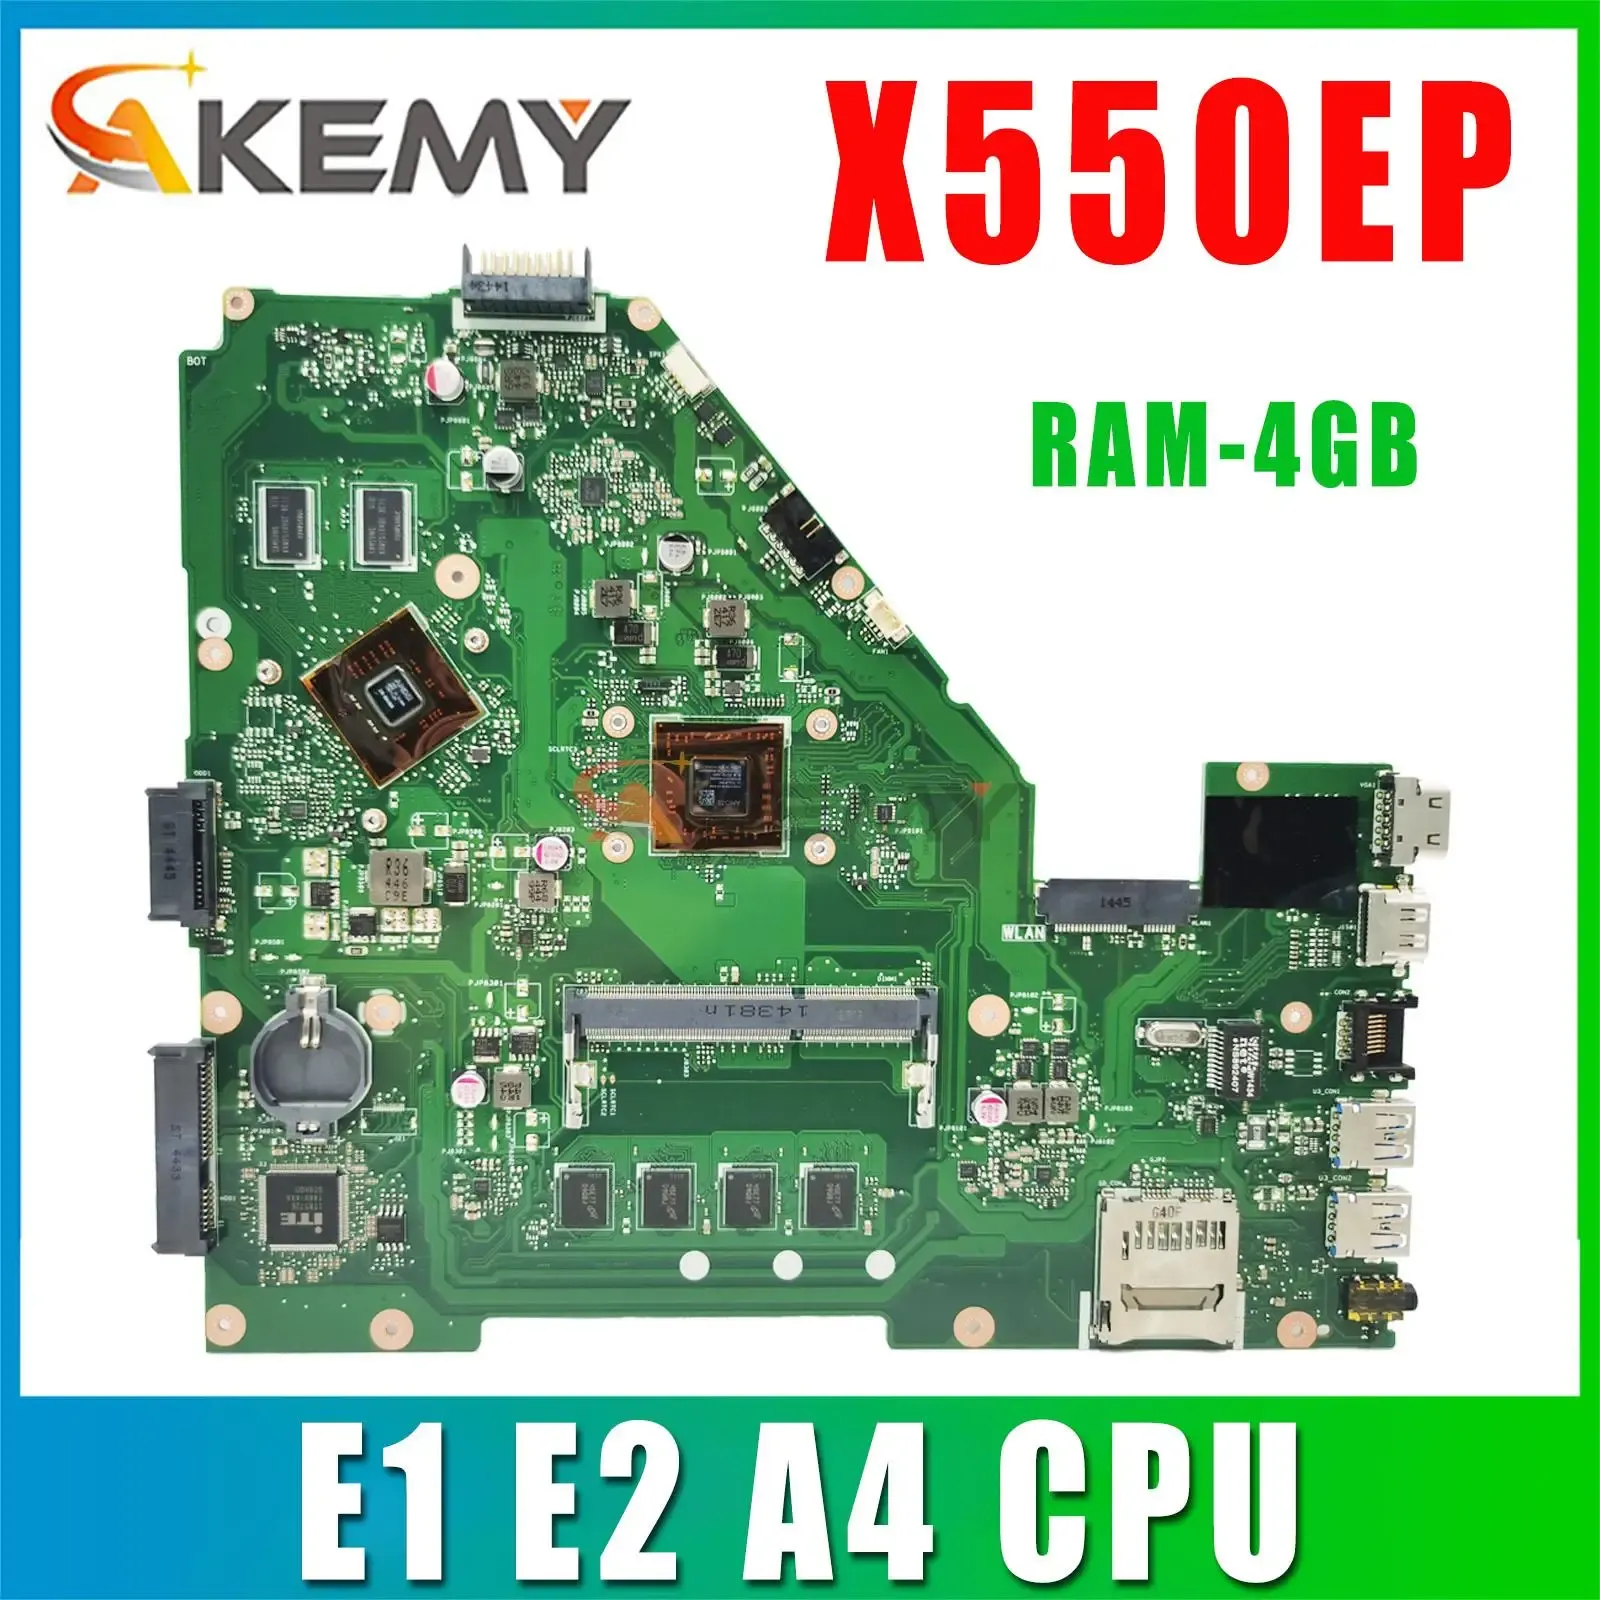 Motherboard Notebook X550EP Maineboard voor ASUS X550 X550E D552E X552E X550EA Laptop Moedertop met E1 E2 A4 RAM4GB PM/UMA